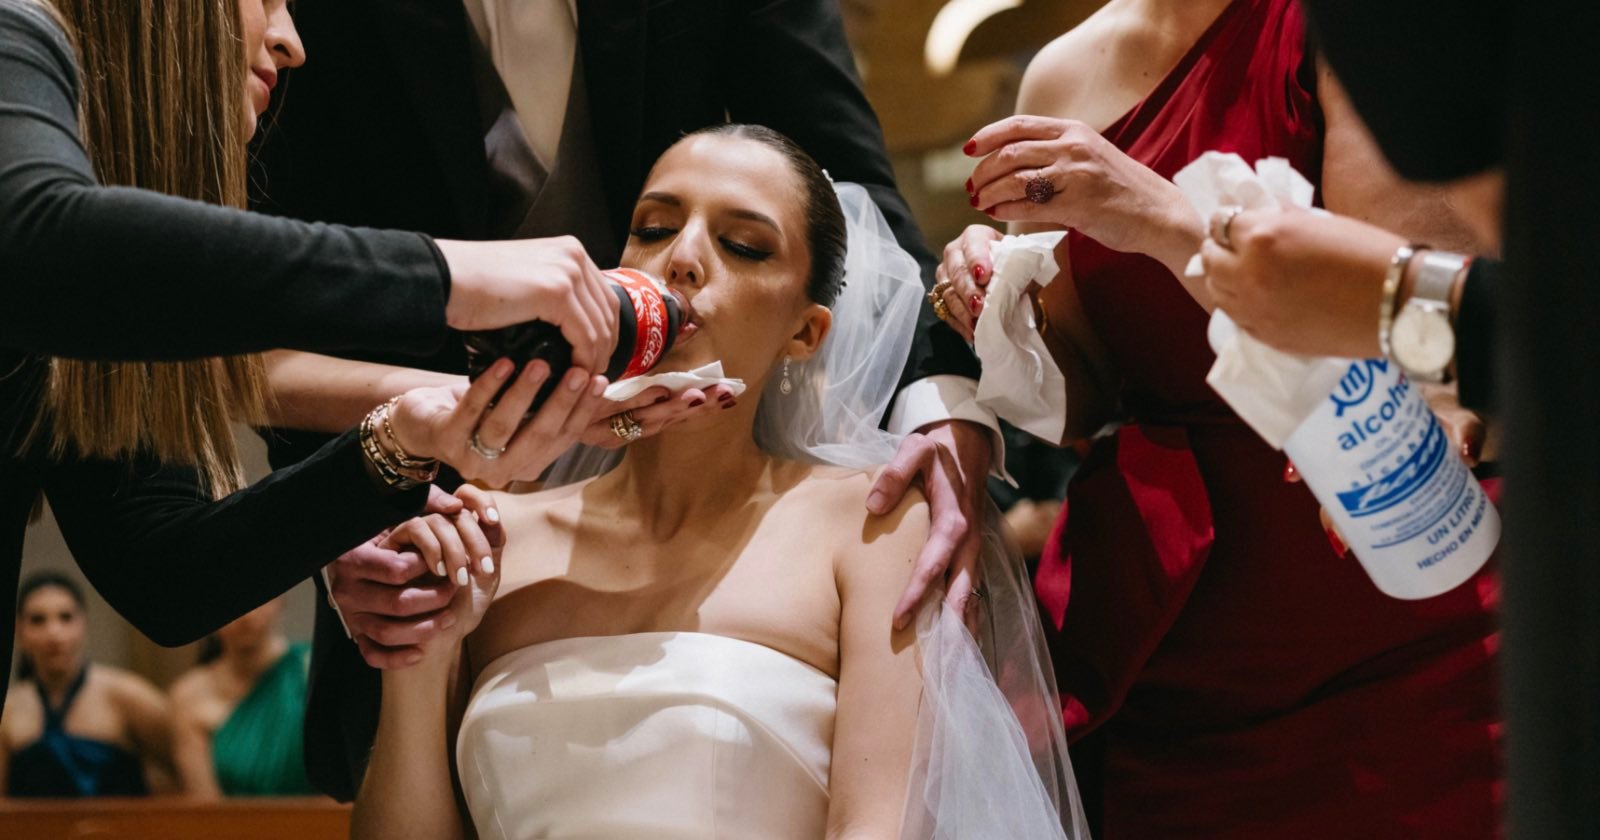 Wedding Photographer Goes Viral With Images of Bride Almost Passing Out